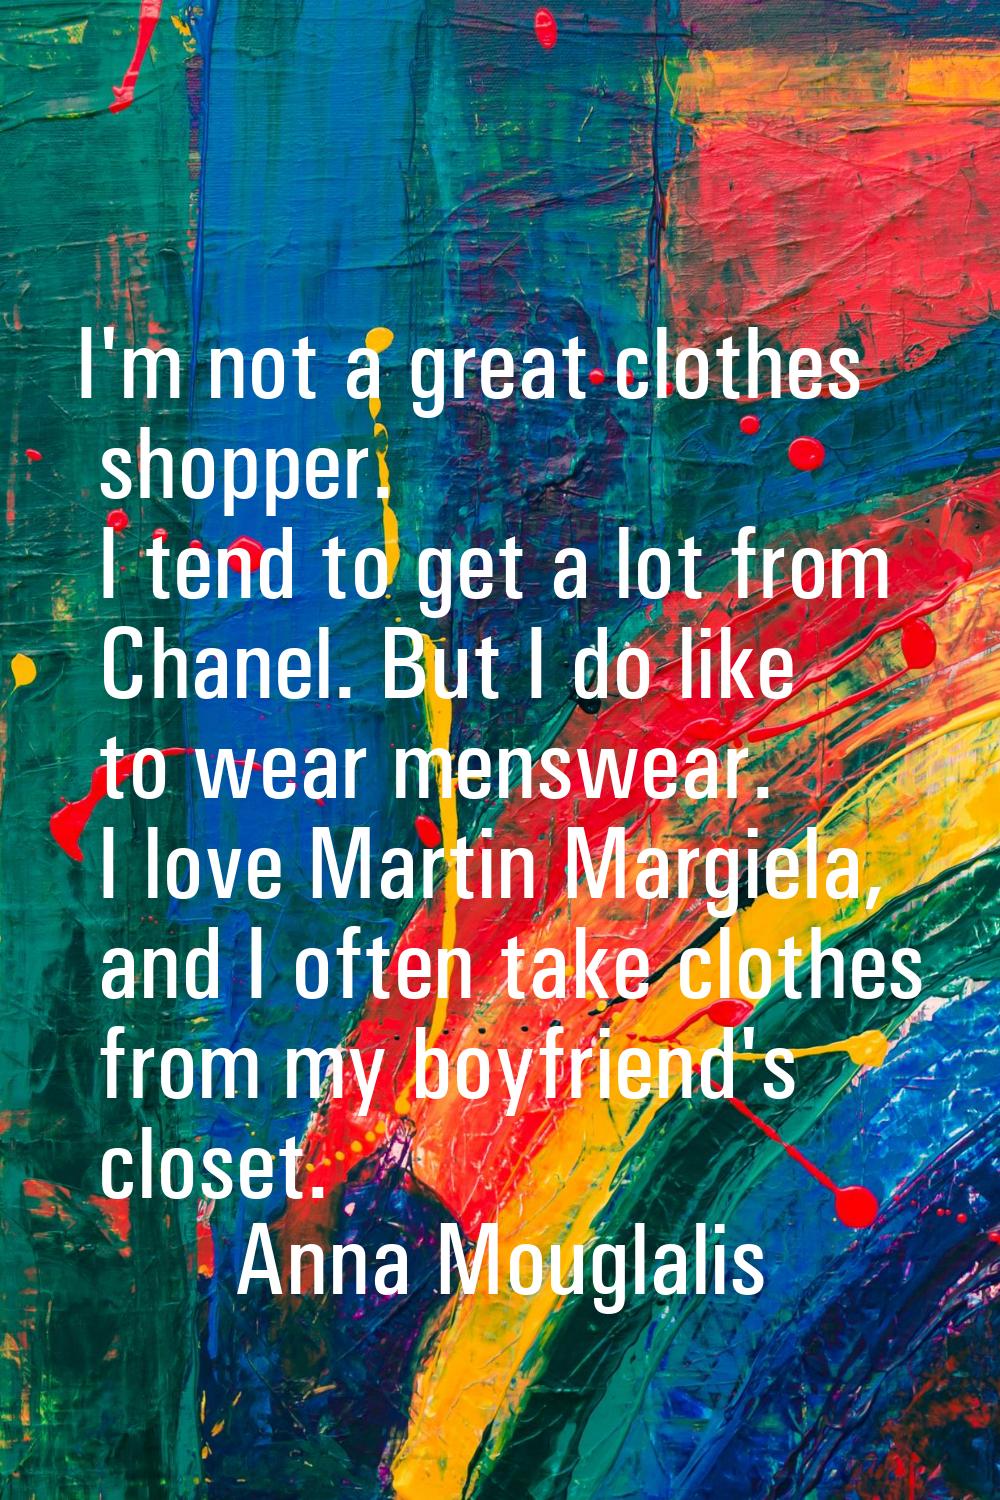 I'm not a great clothes shopper. I tend to get a lot from Chanel. But I do like to wear menswear. I